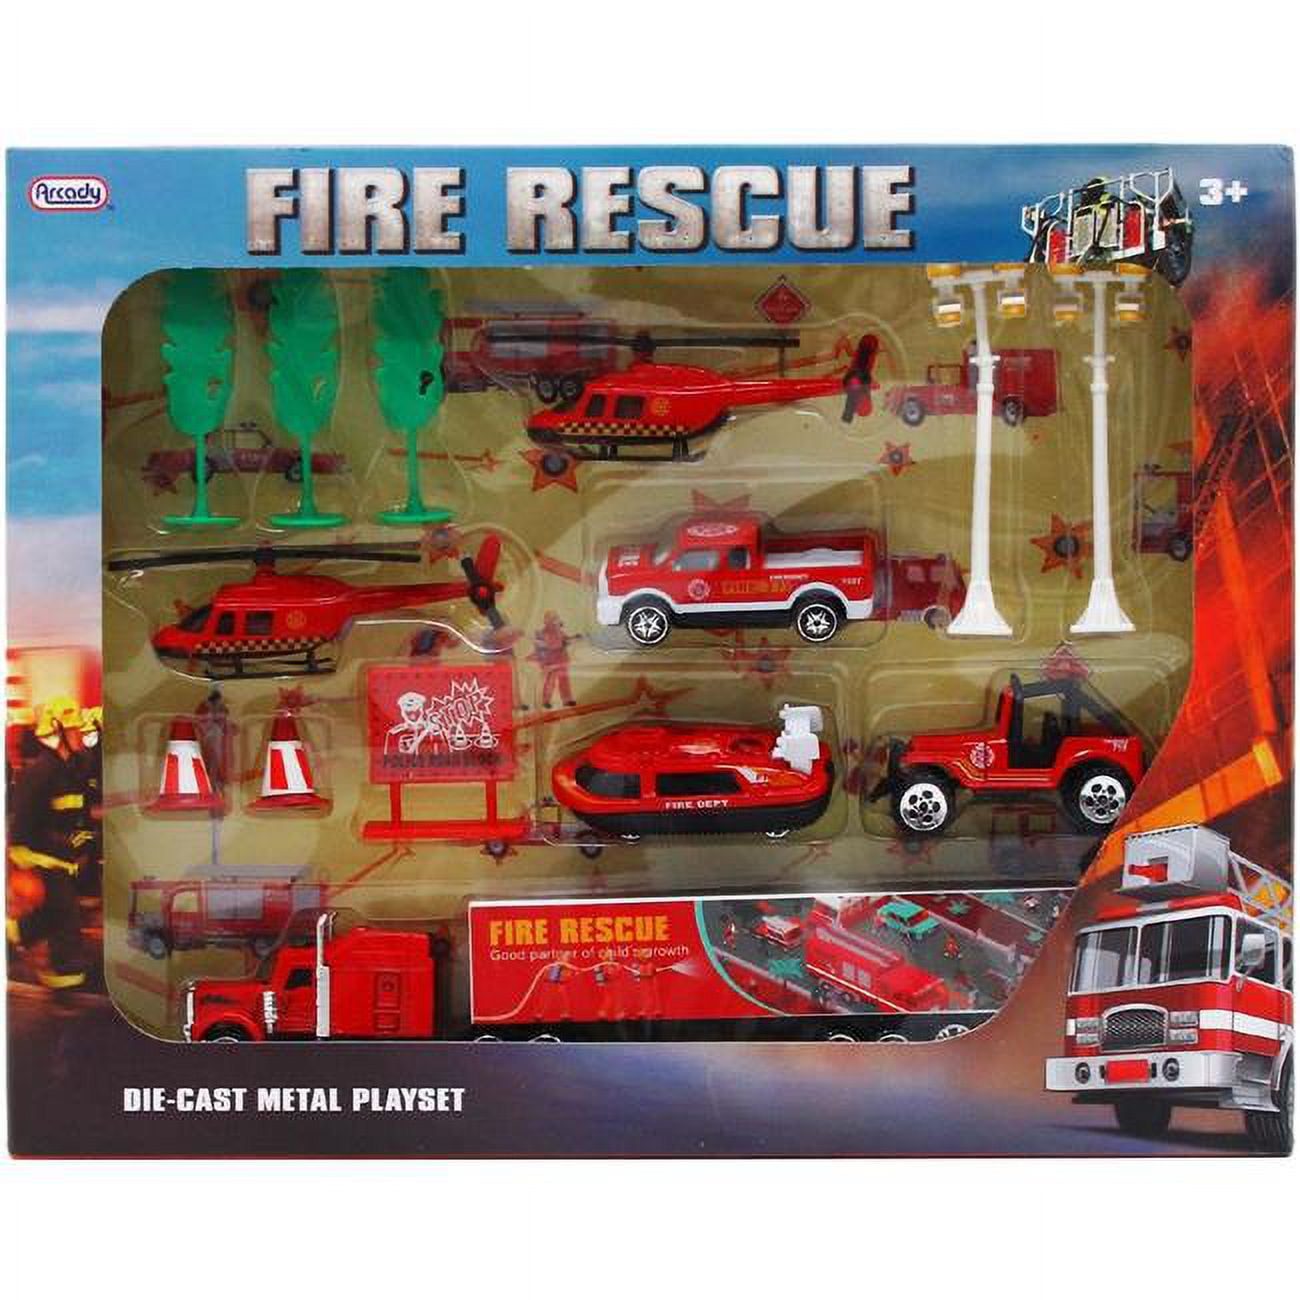 Picture of DDI 2340965 Diecast Firefighter Play Set with Accessories - 14 Piece - Case of 18